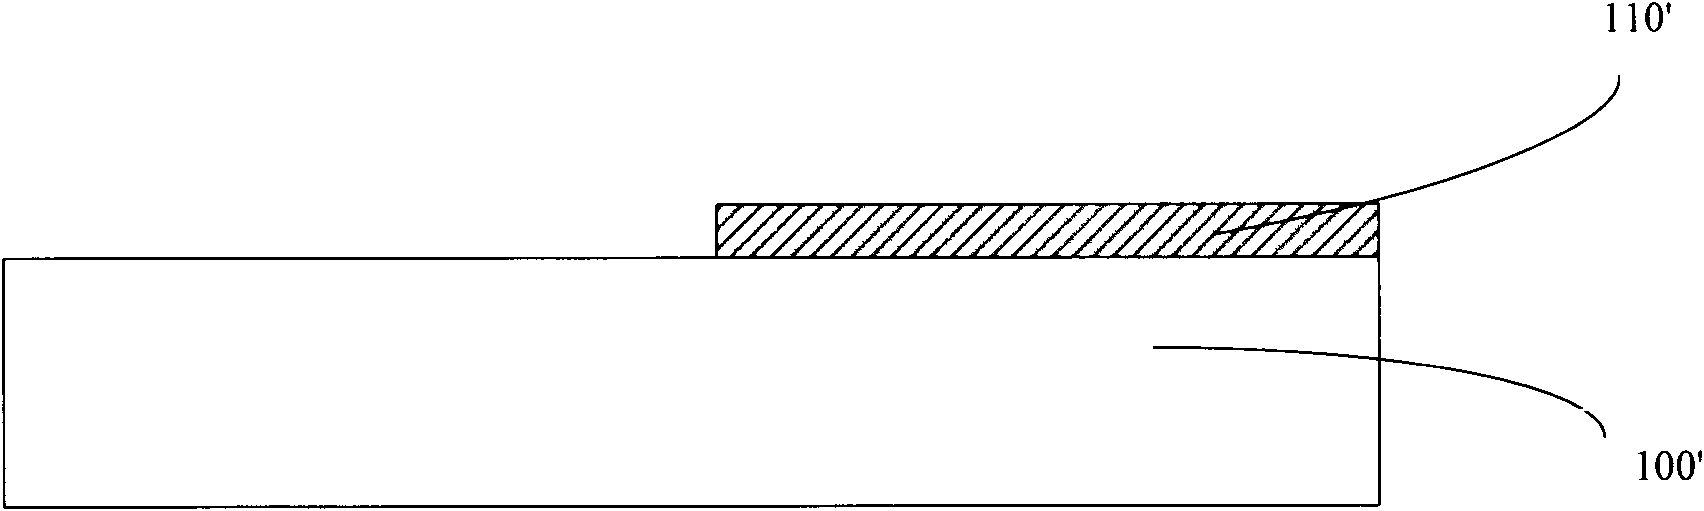 Forming method of diffusion zone